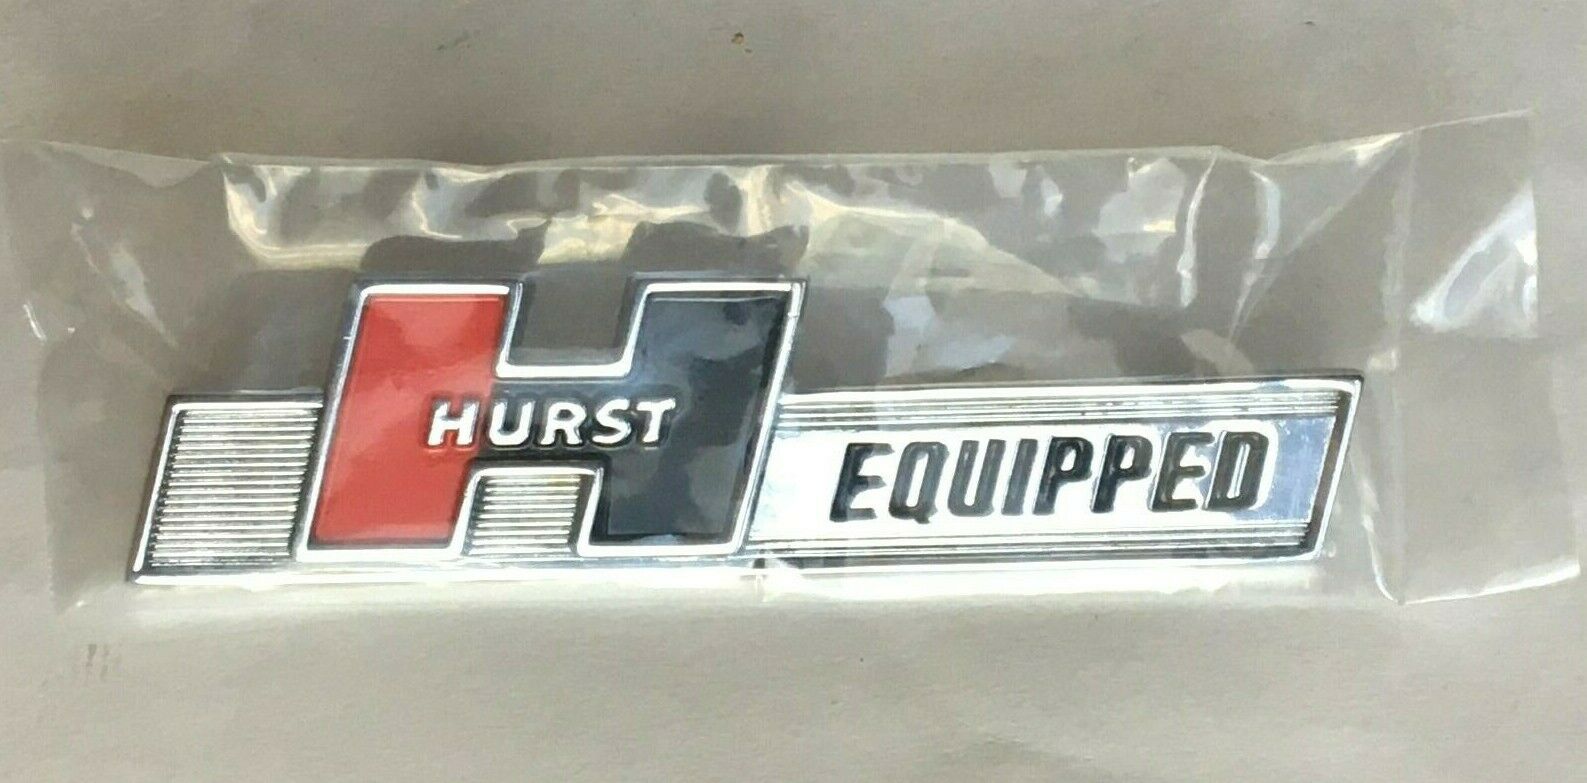 Hurst Equipped Emblem, Diecast Metal - 3 Prong Mount, 5" All Years Gm Cars New